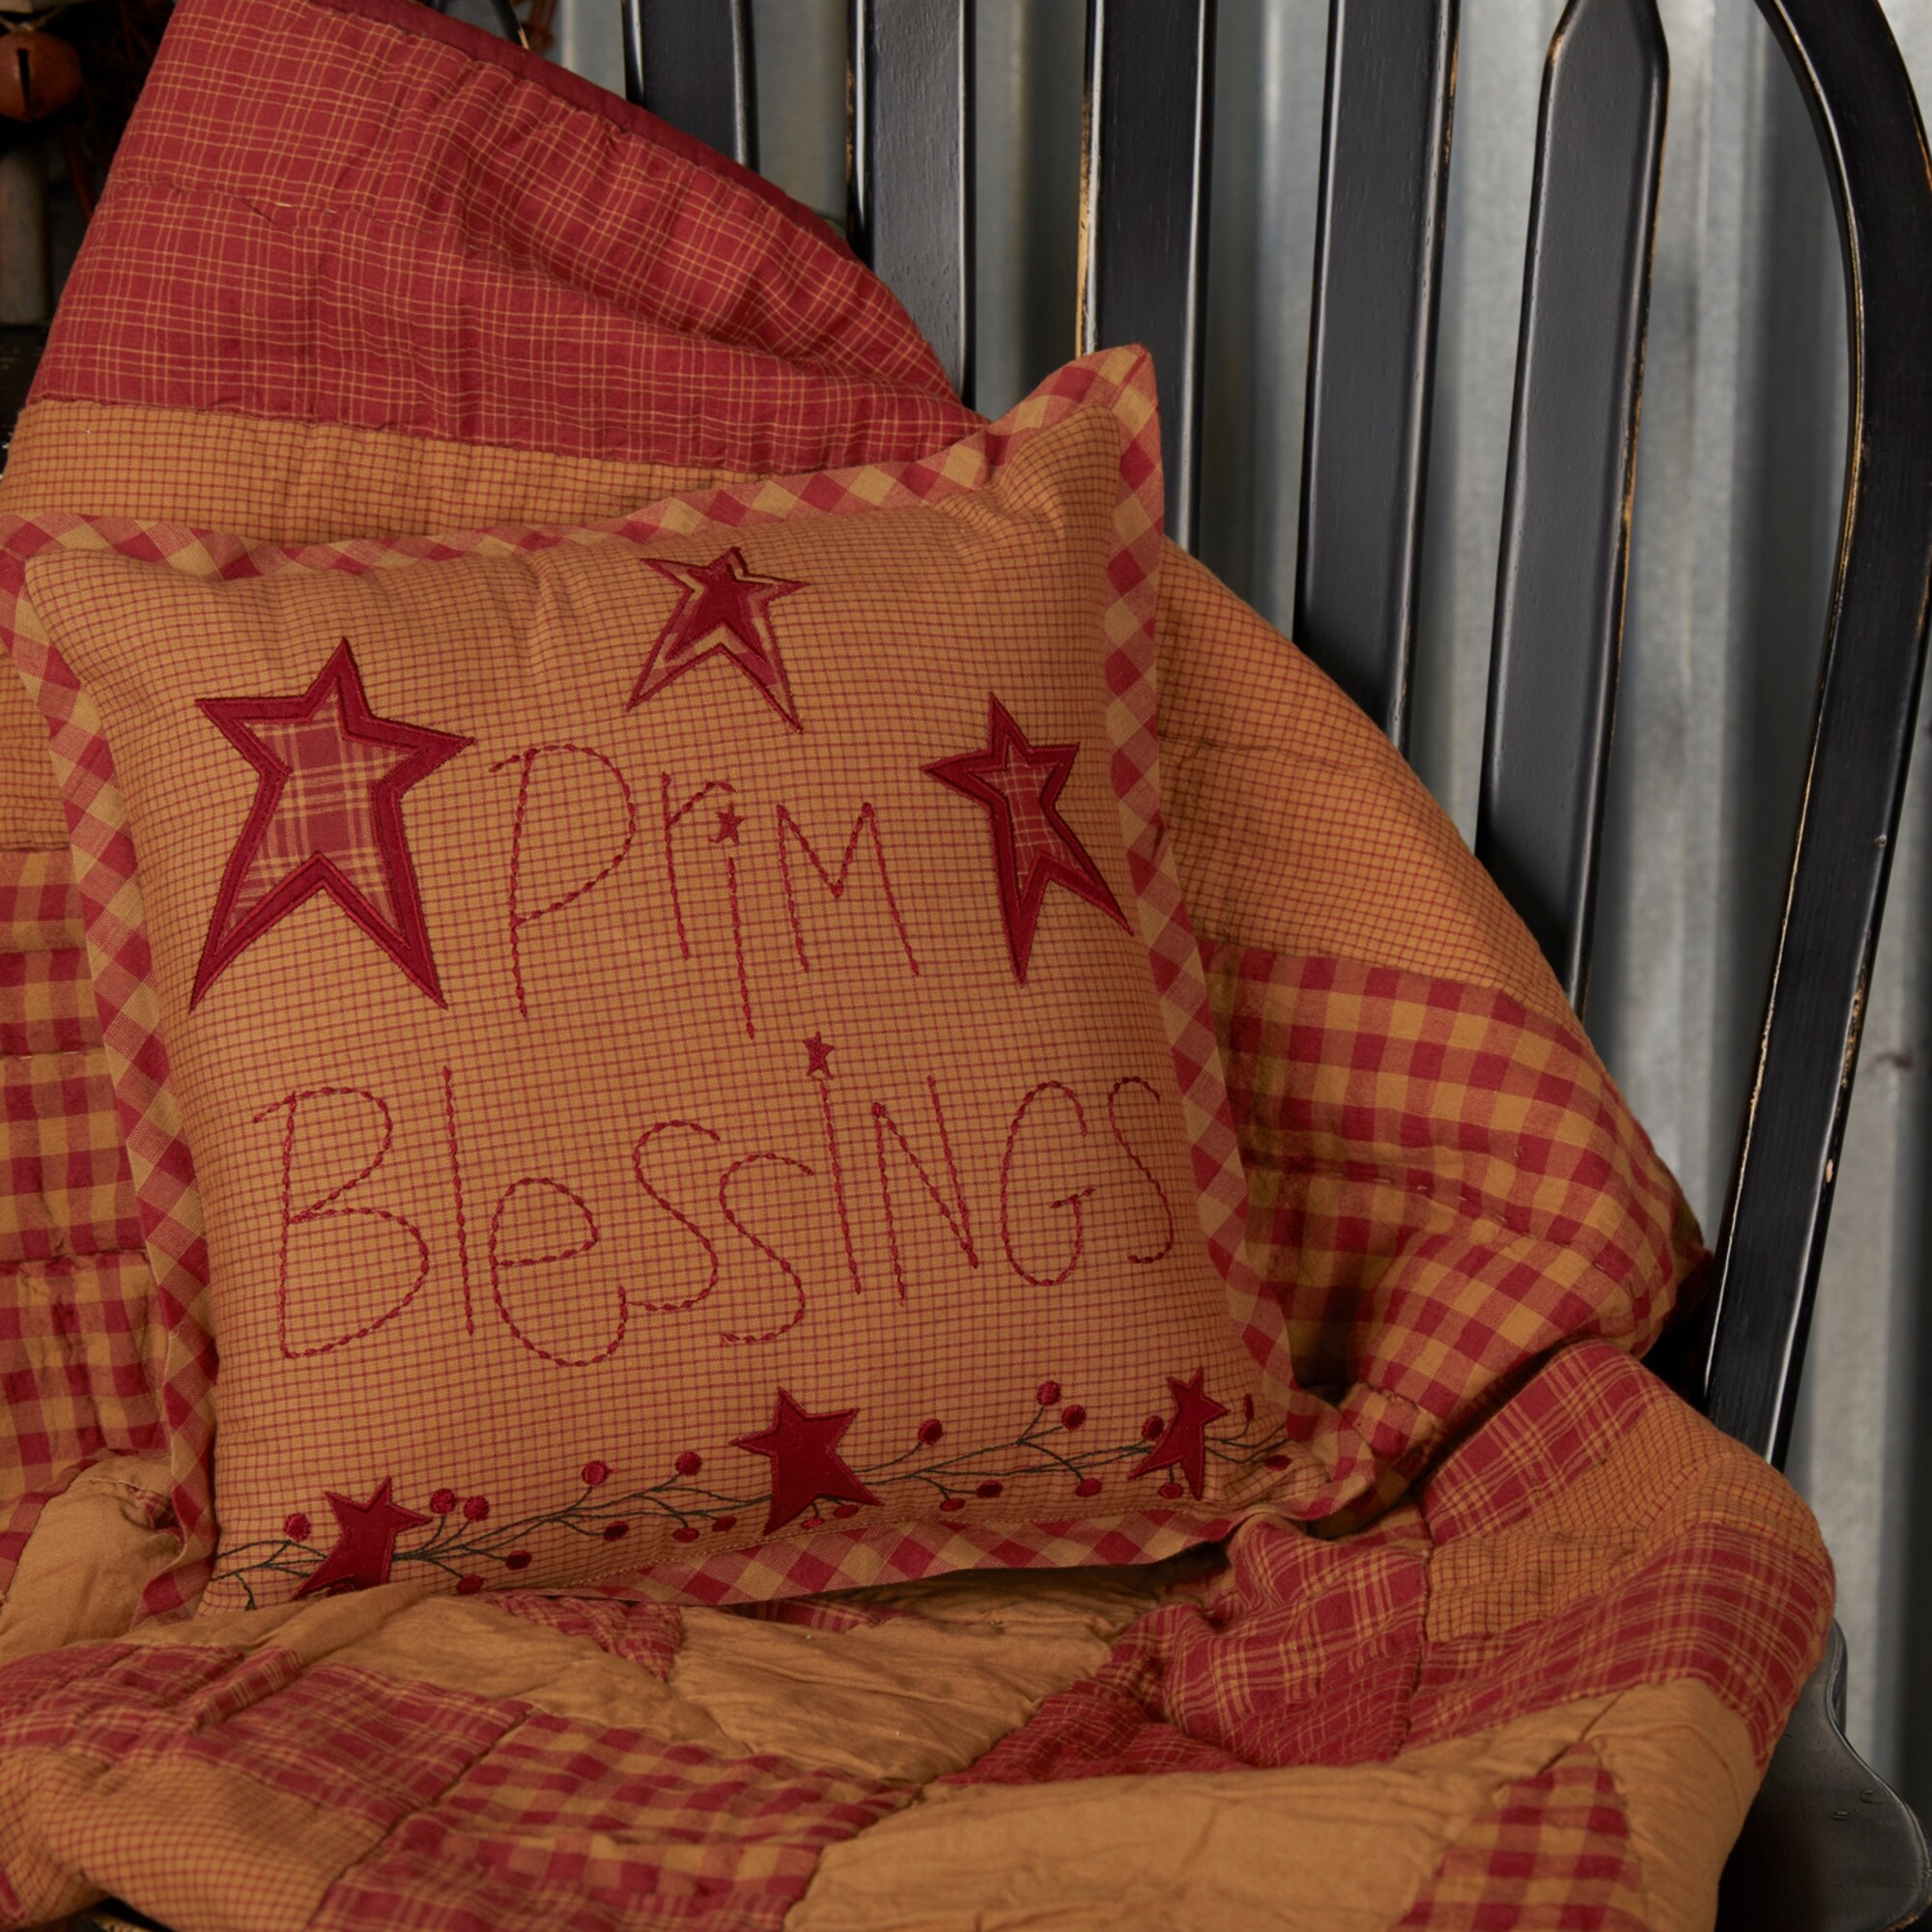 https://ak1.ostkcdn.com/images/products/is/images/direct/752d63540aedbf34cd62da664795a37deba48b04/Ninepatch-Star-Prim-Blessings-Pillow-12x12.jpg